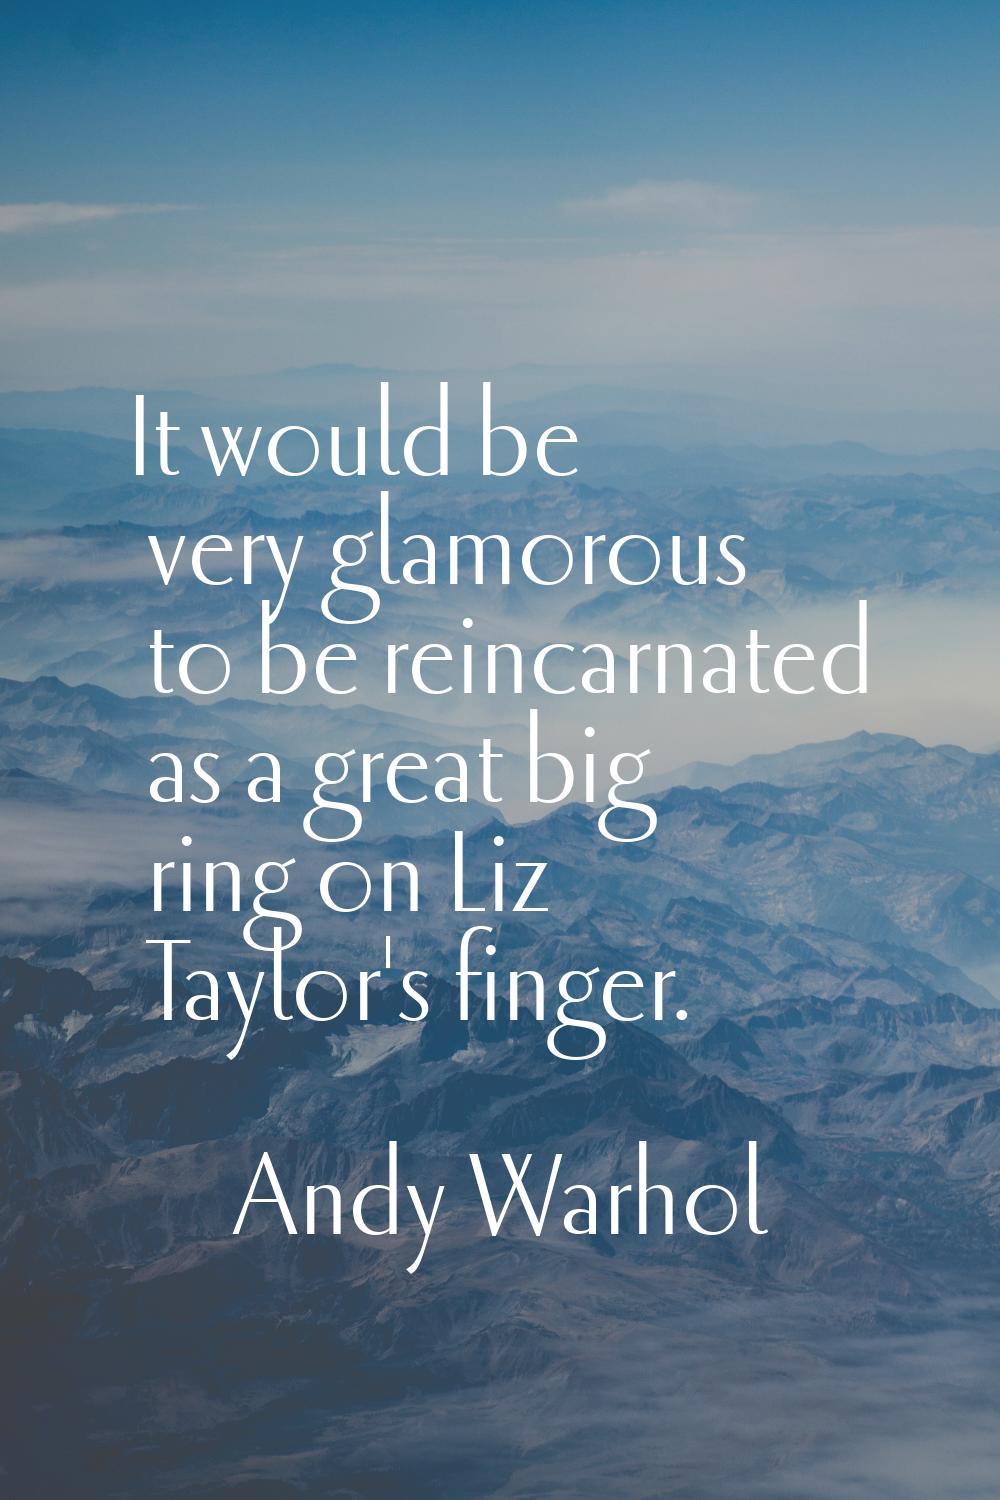 It would be very glamorous to be reincarnated as a great big ring on Liz Taylor's finger.